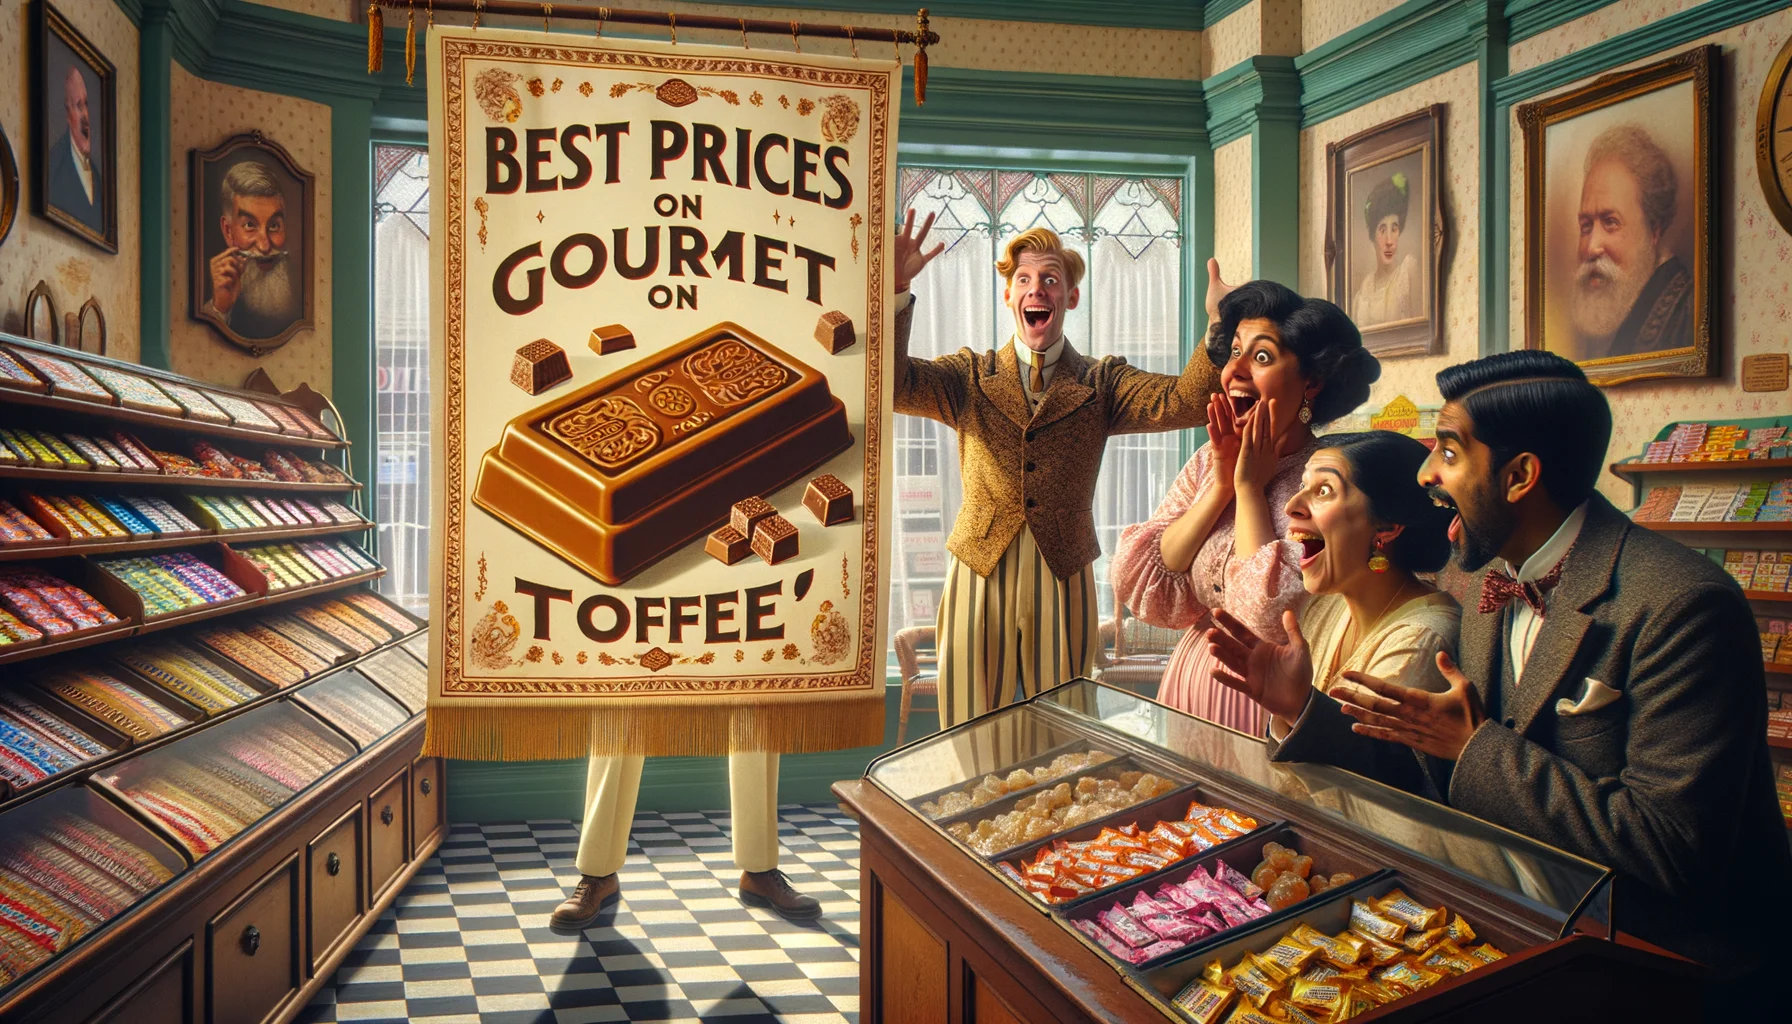 Imagine a humorously exaggerated scenario in a candy store. It's a sunlit afternoon with soft pastel colors setting the mood. An eccentric Caucasian shopkeeper, cheerfully dressed in a vintage outfit, is unveiling a grand 'Best Prices on Gourmet Toffee' banner. The banner is artistically garnished with detailed illustrations of toffees. Astonished customers, a surprised South Asian woman and a Hispanic man, are captured in the frame. Their faces reflect joyous shock. The cases full of candy in the background add to the ambient delight. The shop's ambience is reminiscent of the 1910s, with decorative elements unique for that era.